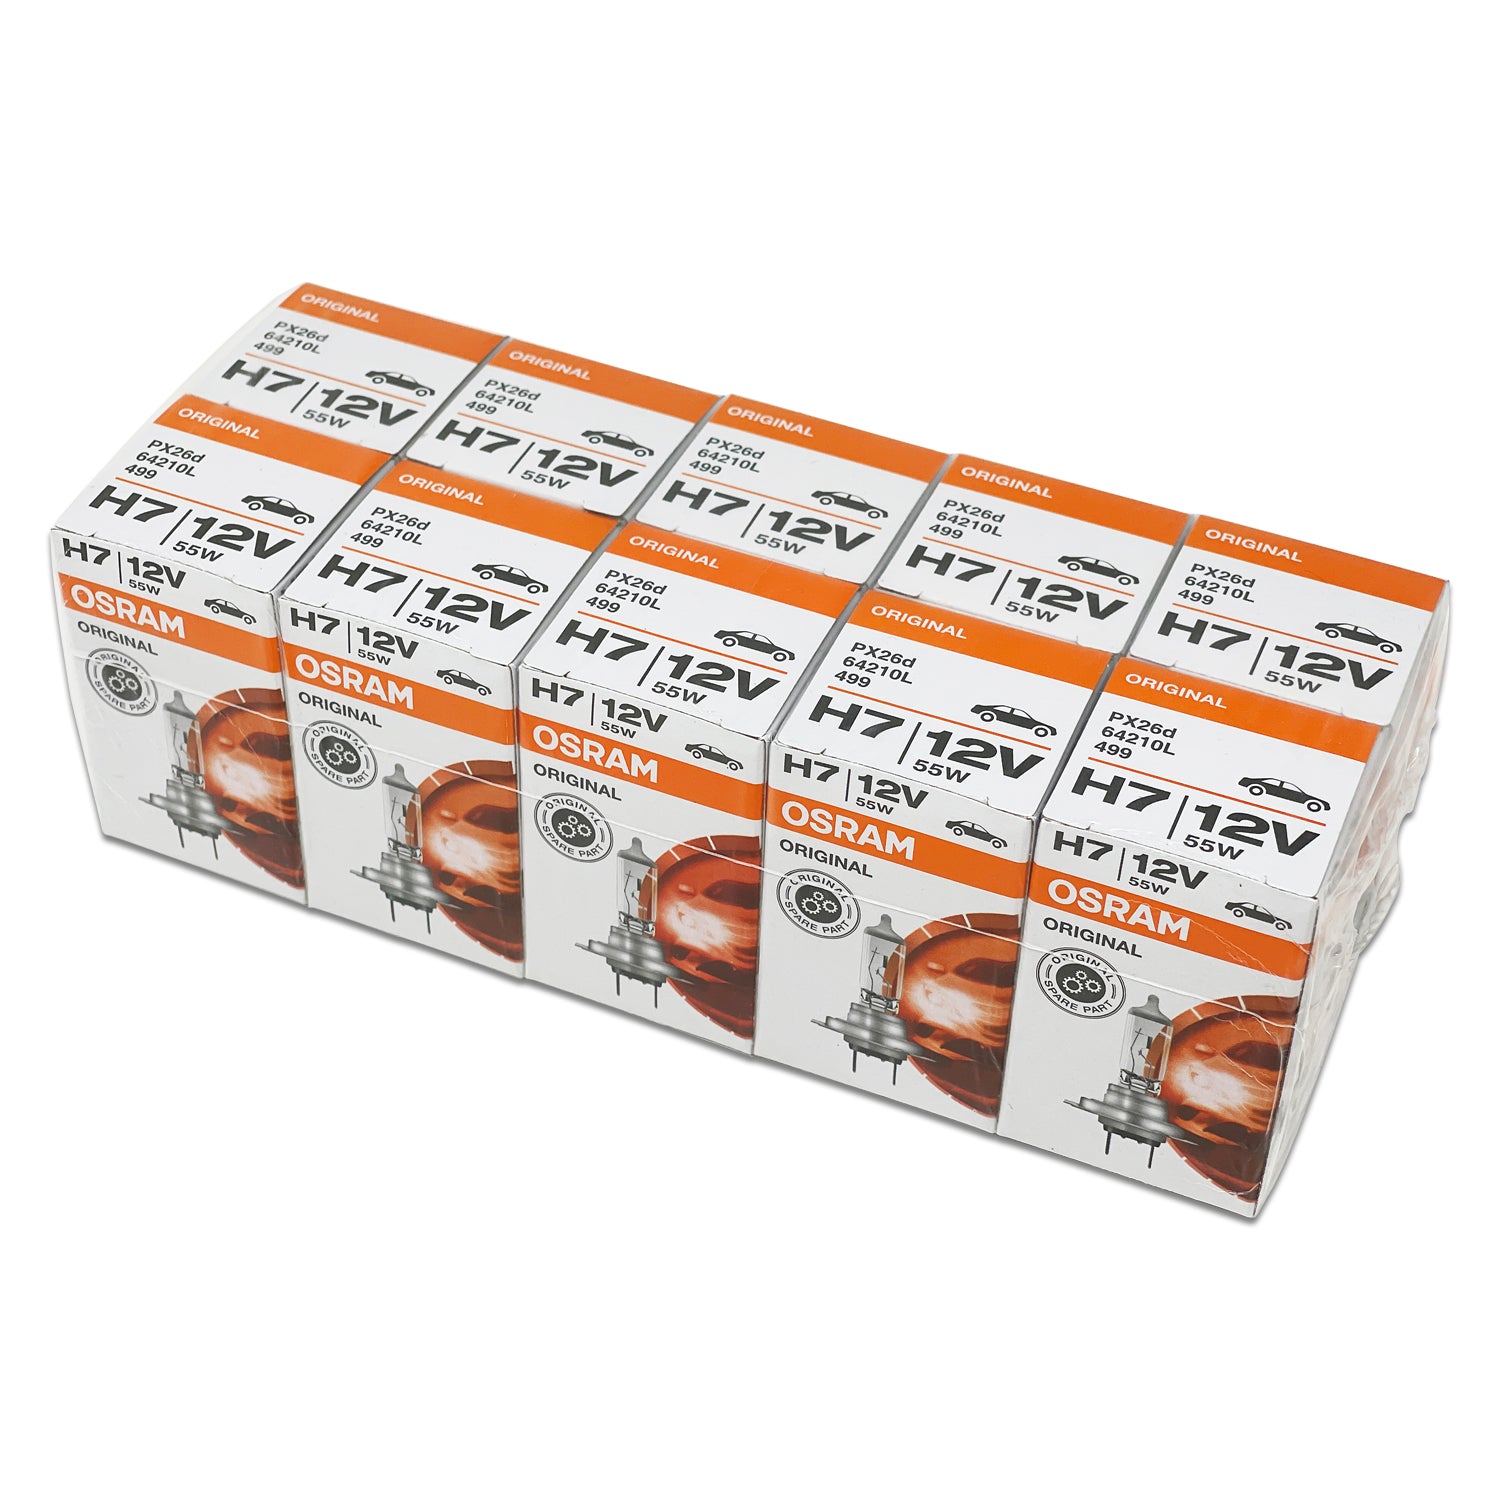 Halogenlampe H7 - Bulbs by Fliegl Agro-Center GmbH